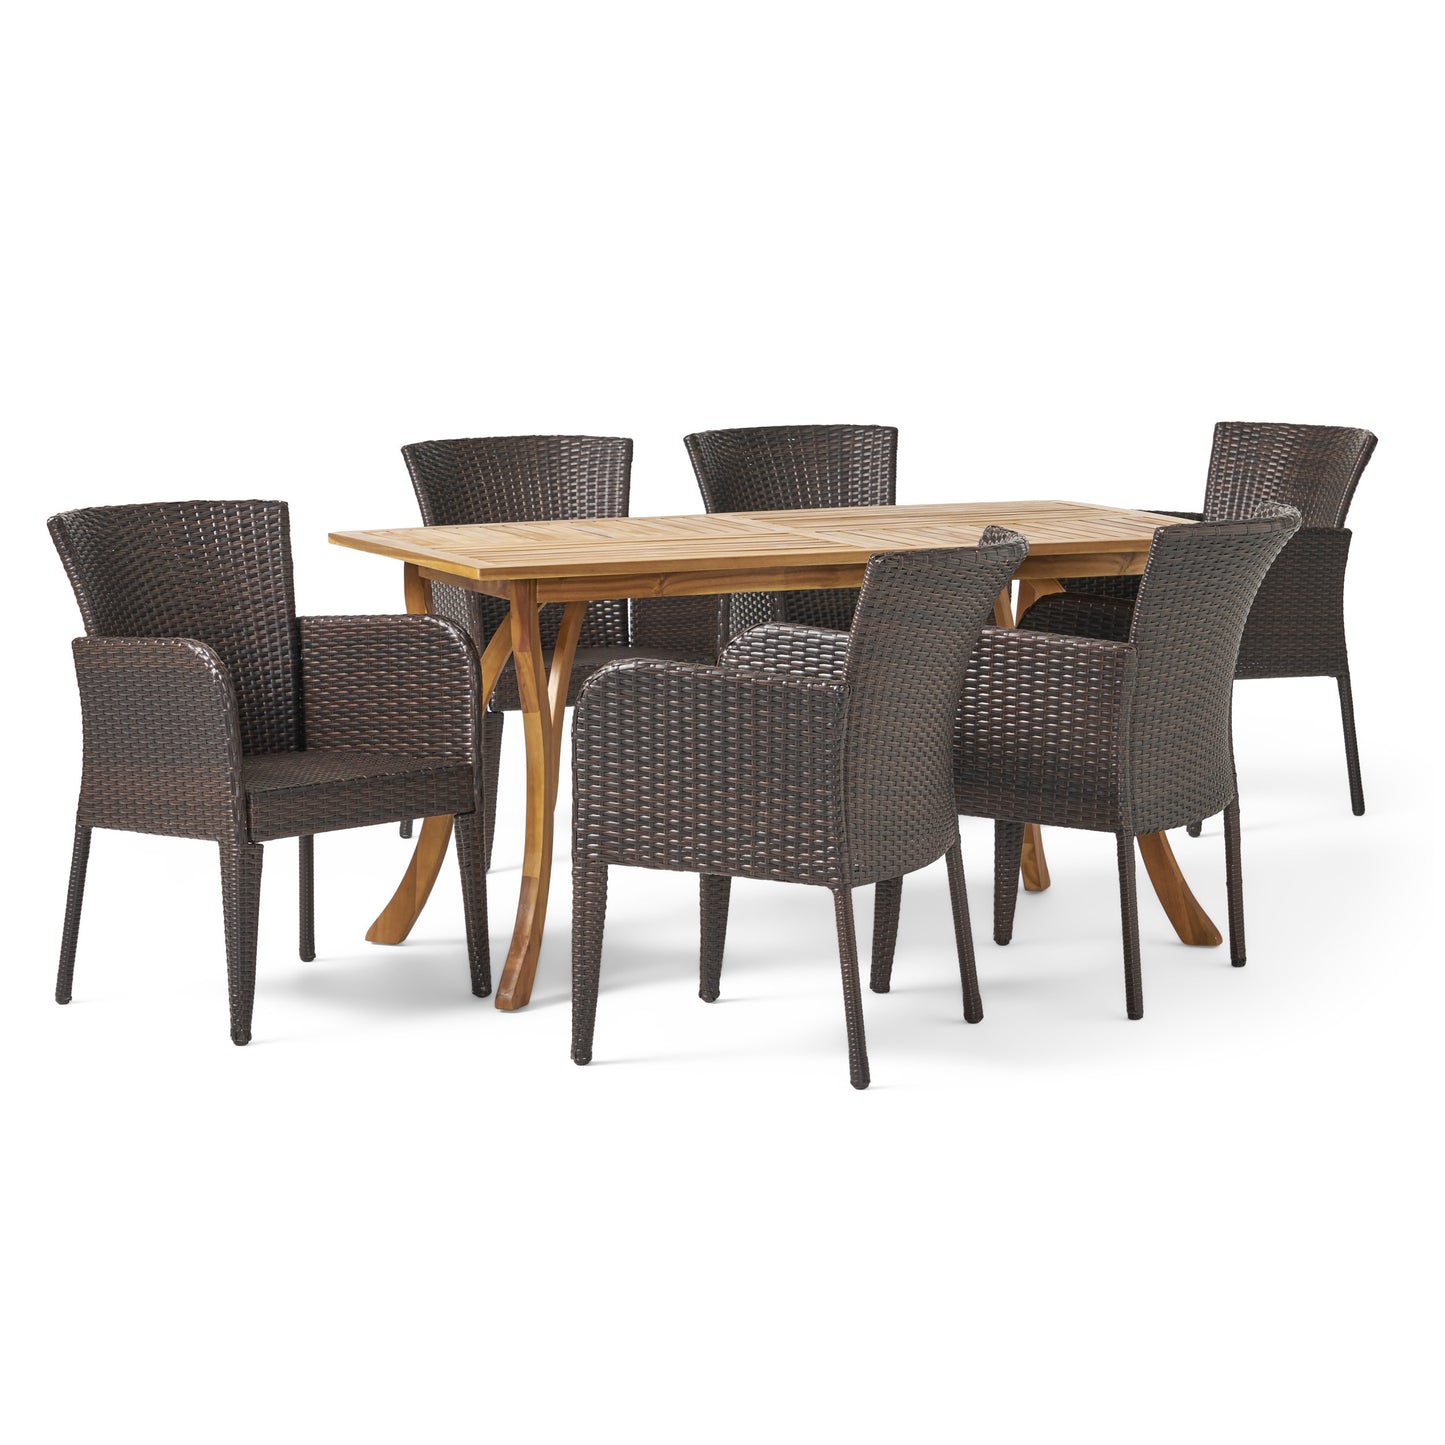 Helton Outdoor 7-Piece Multi-Brown Wicker Dining Set with Teak Acacia Wood Table